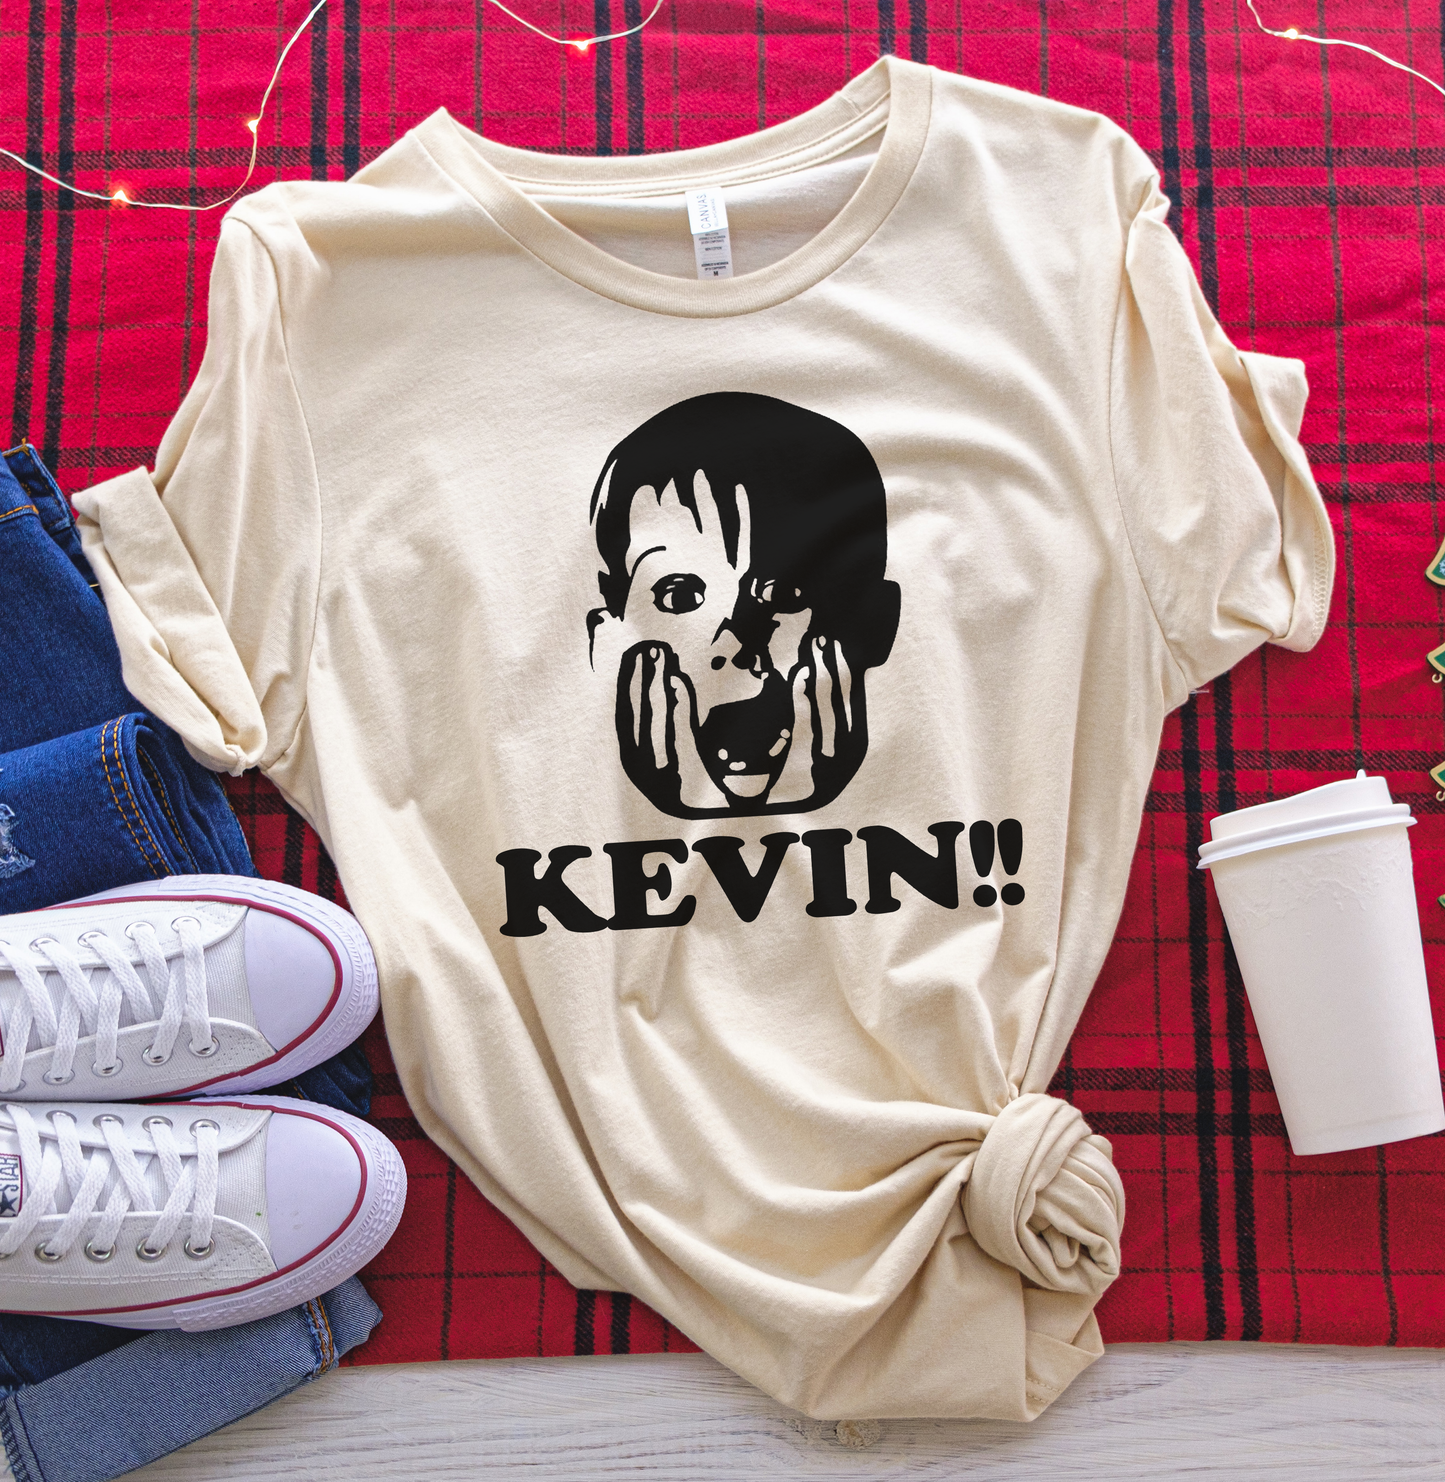 Kevin!! Tee